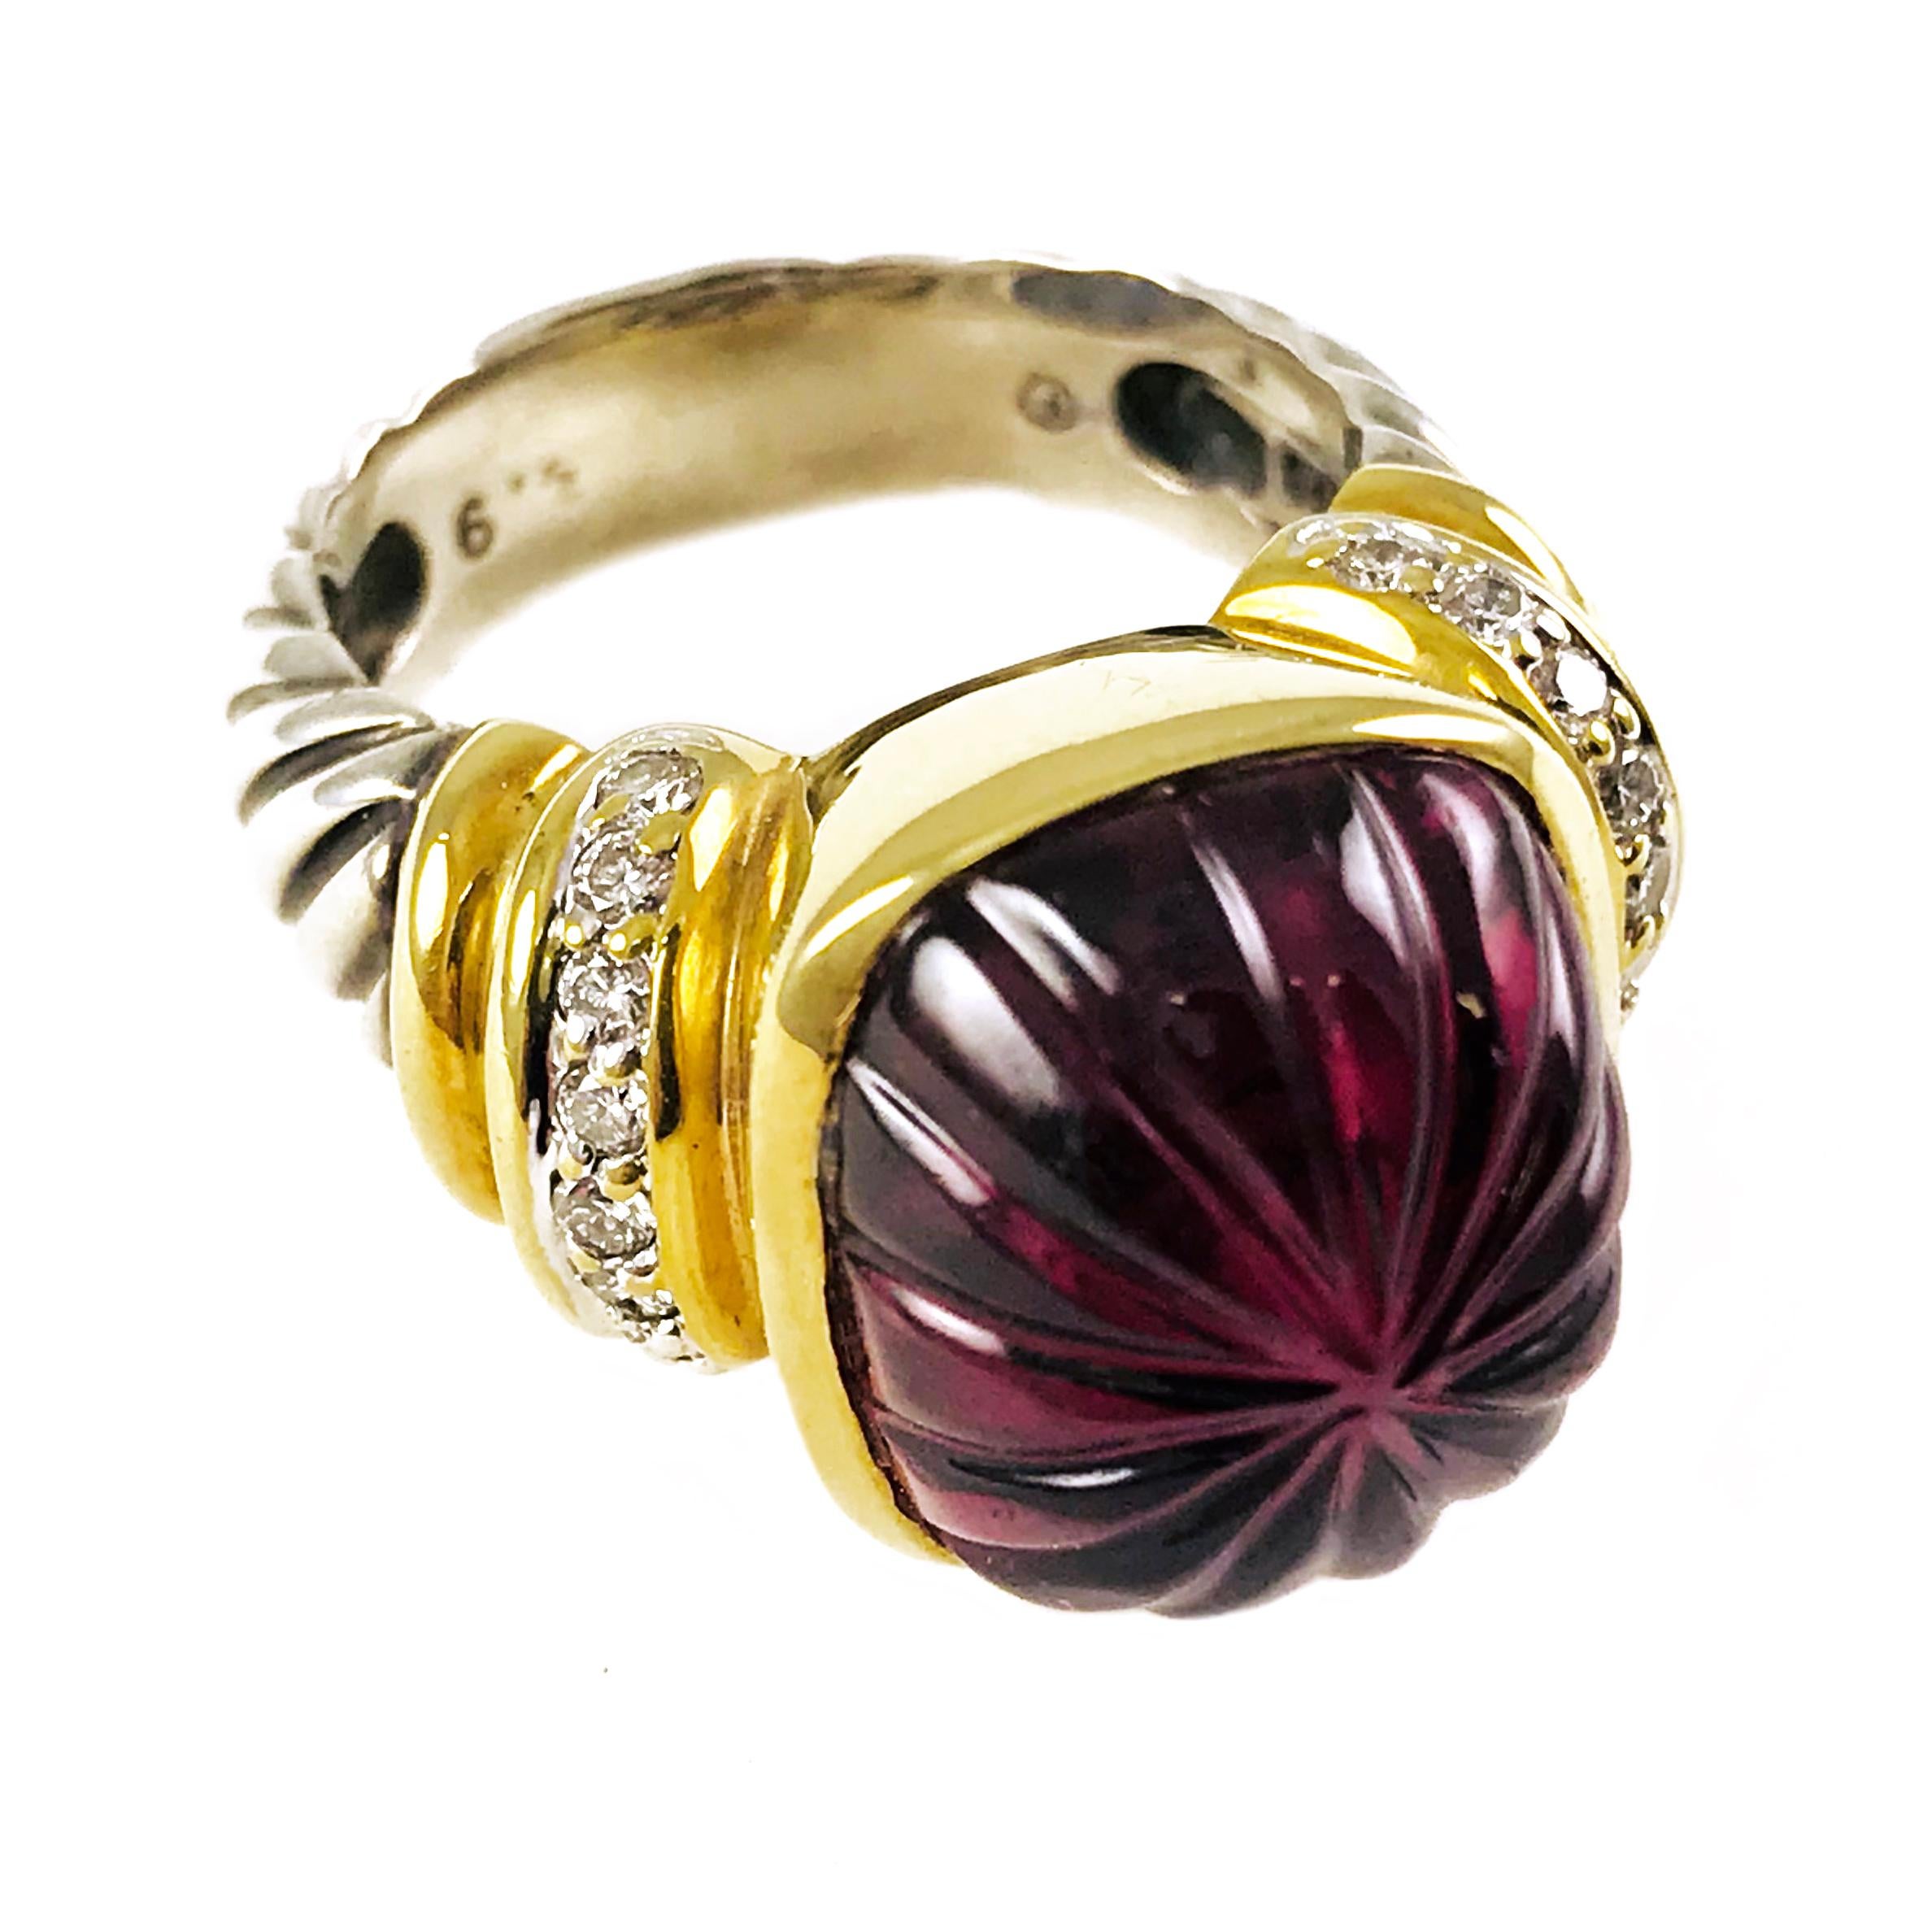 David Yurman Two-Tone 18k yellow gold and silver ring. DY logo mark on one side of the ring and Yurman's signature silver cable band shank with a 15mm x 15mm purple fantasy cut Amethyst. Round bead set diamonds on both sides totaling 0.36 carat